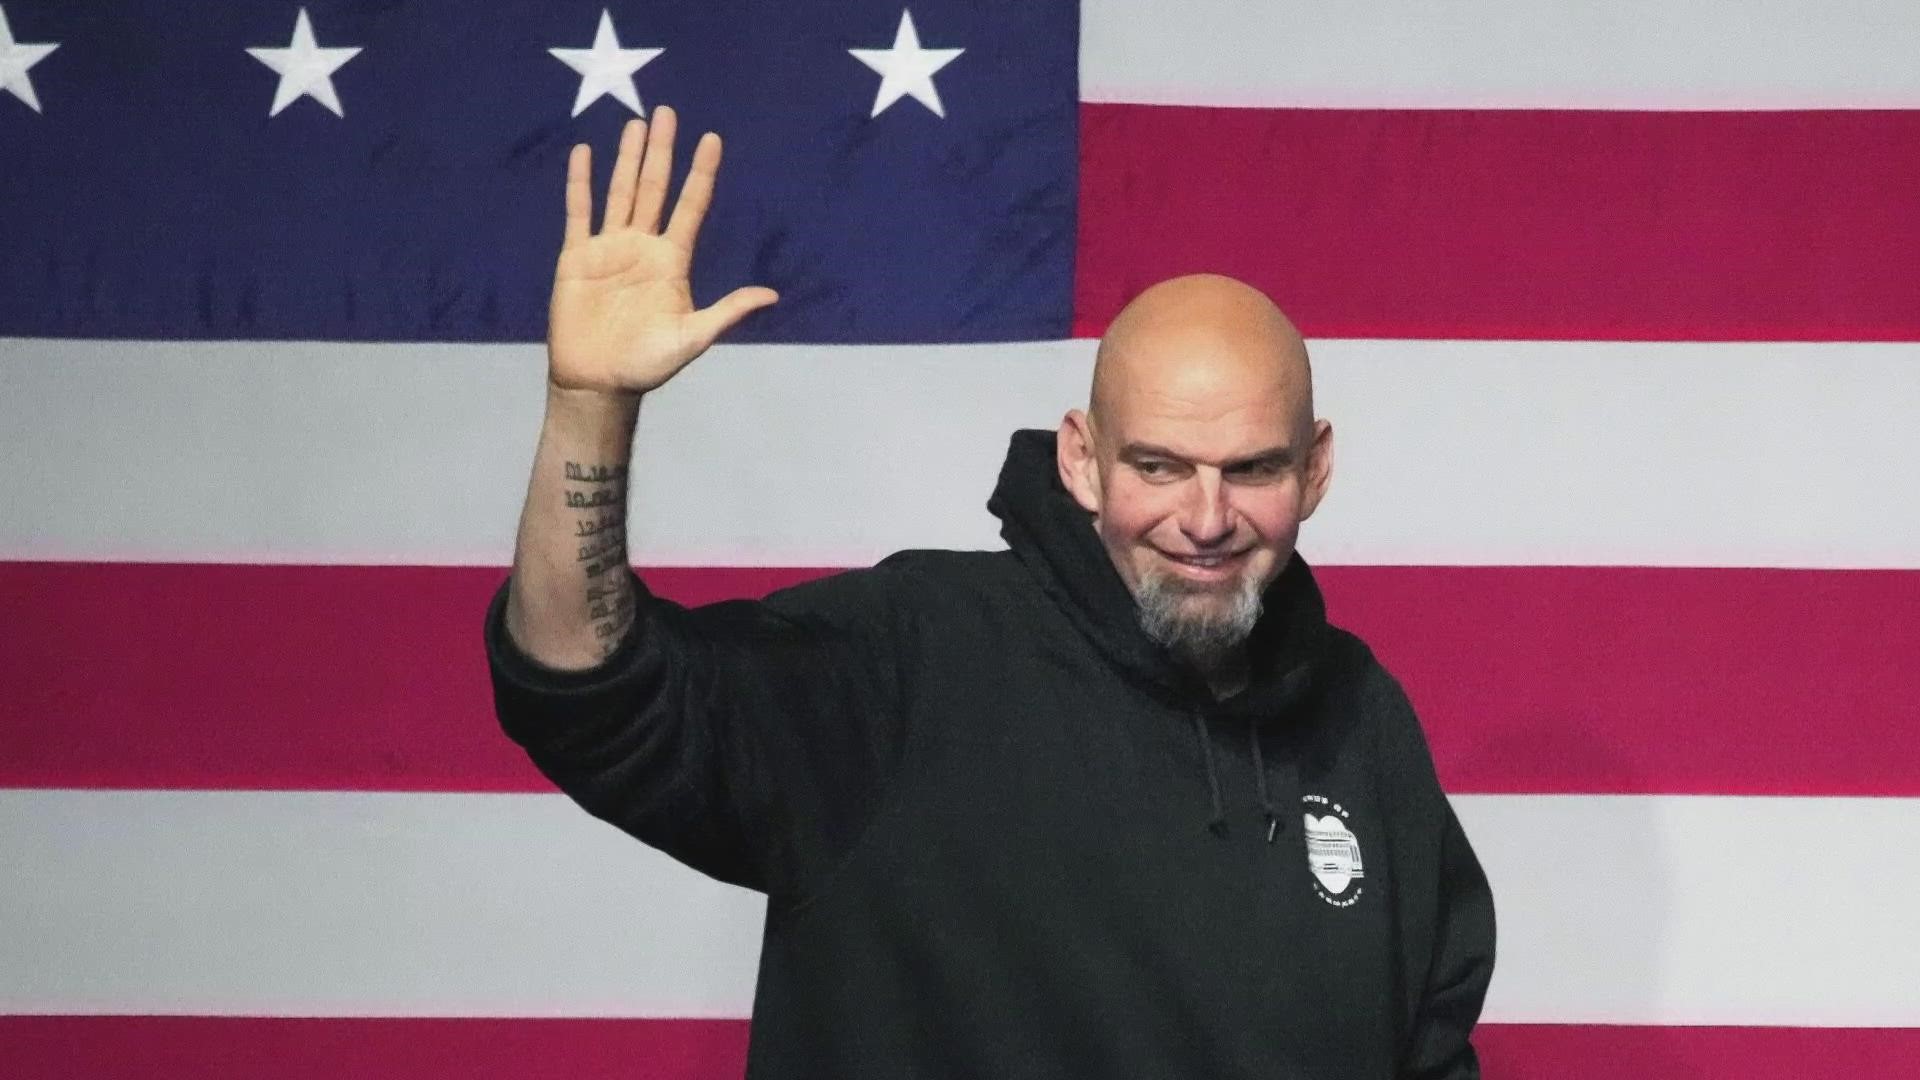 The senator's chief of staff says Fetterman has experienced depression off and on throughout his life, but it became severe in recent weeks.